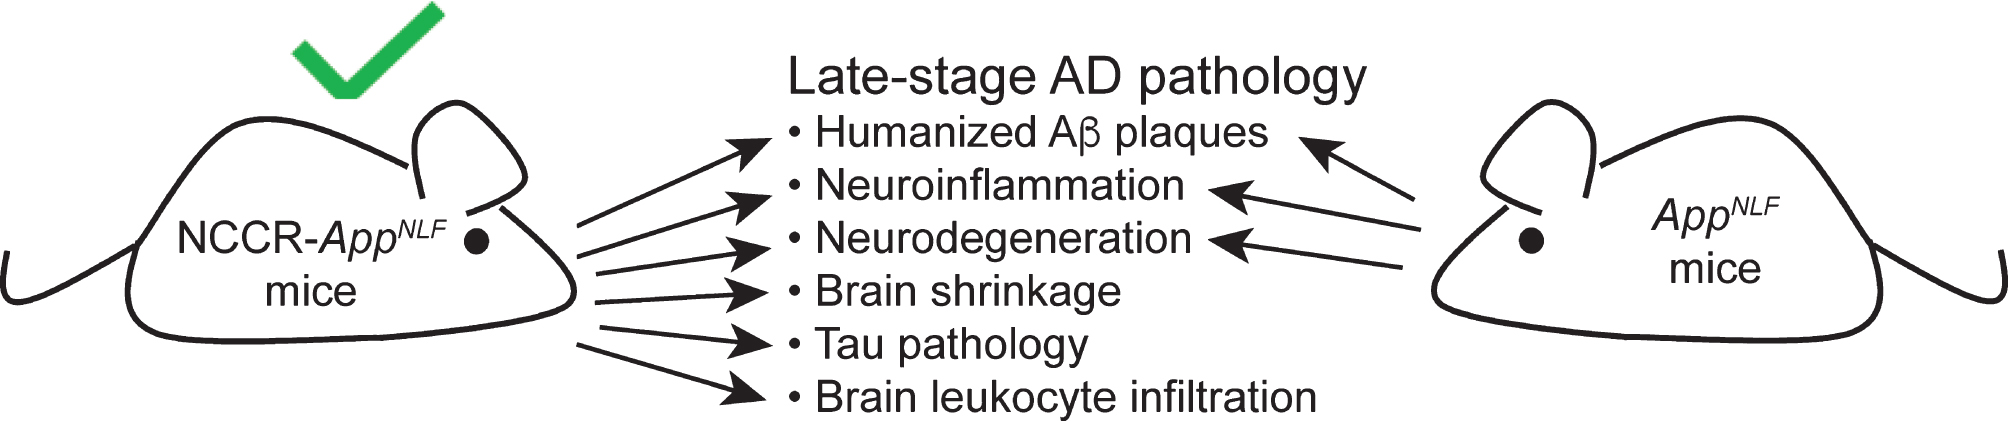 A diagram showing a comparison of late-stage pathological features observed in NCCR-AppNLF and AppNLF mice. Induction of neuronal cell cycle re-entry results in additional AD-related pathological features that are not present in AppNLF mice.